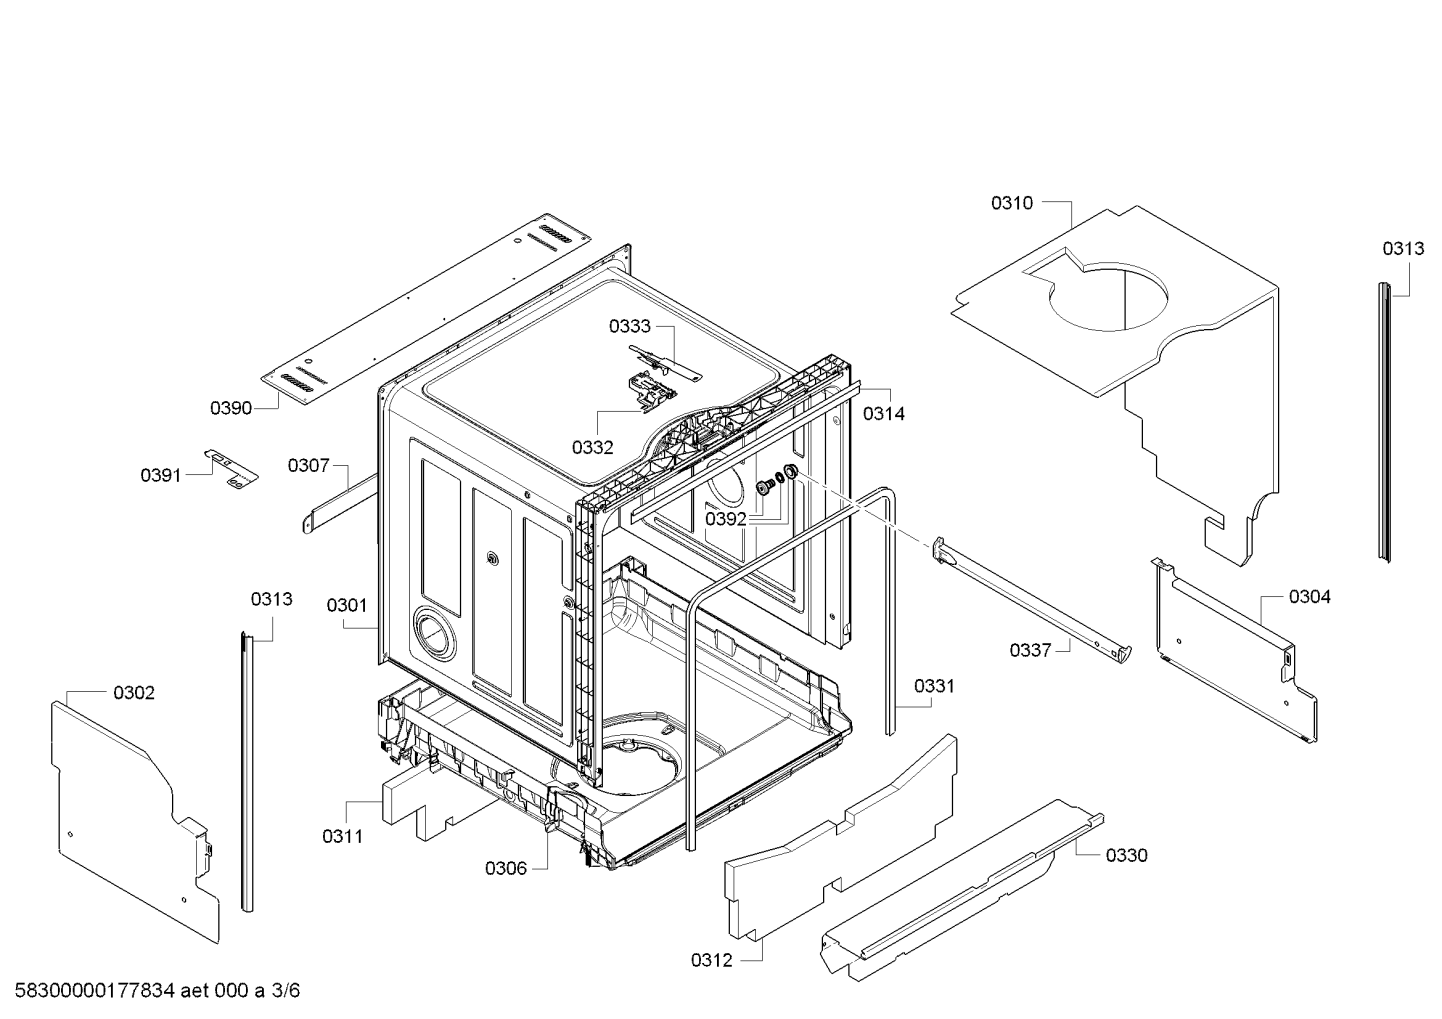 drawing_link_3_device_1624263